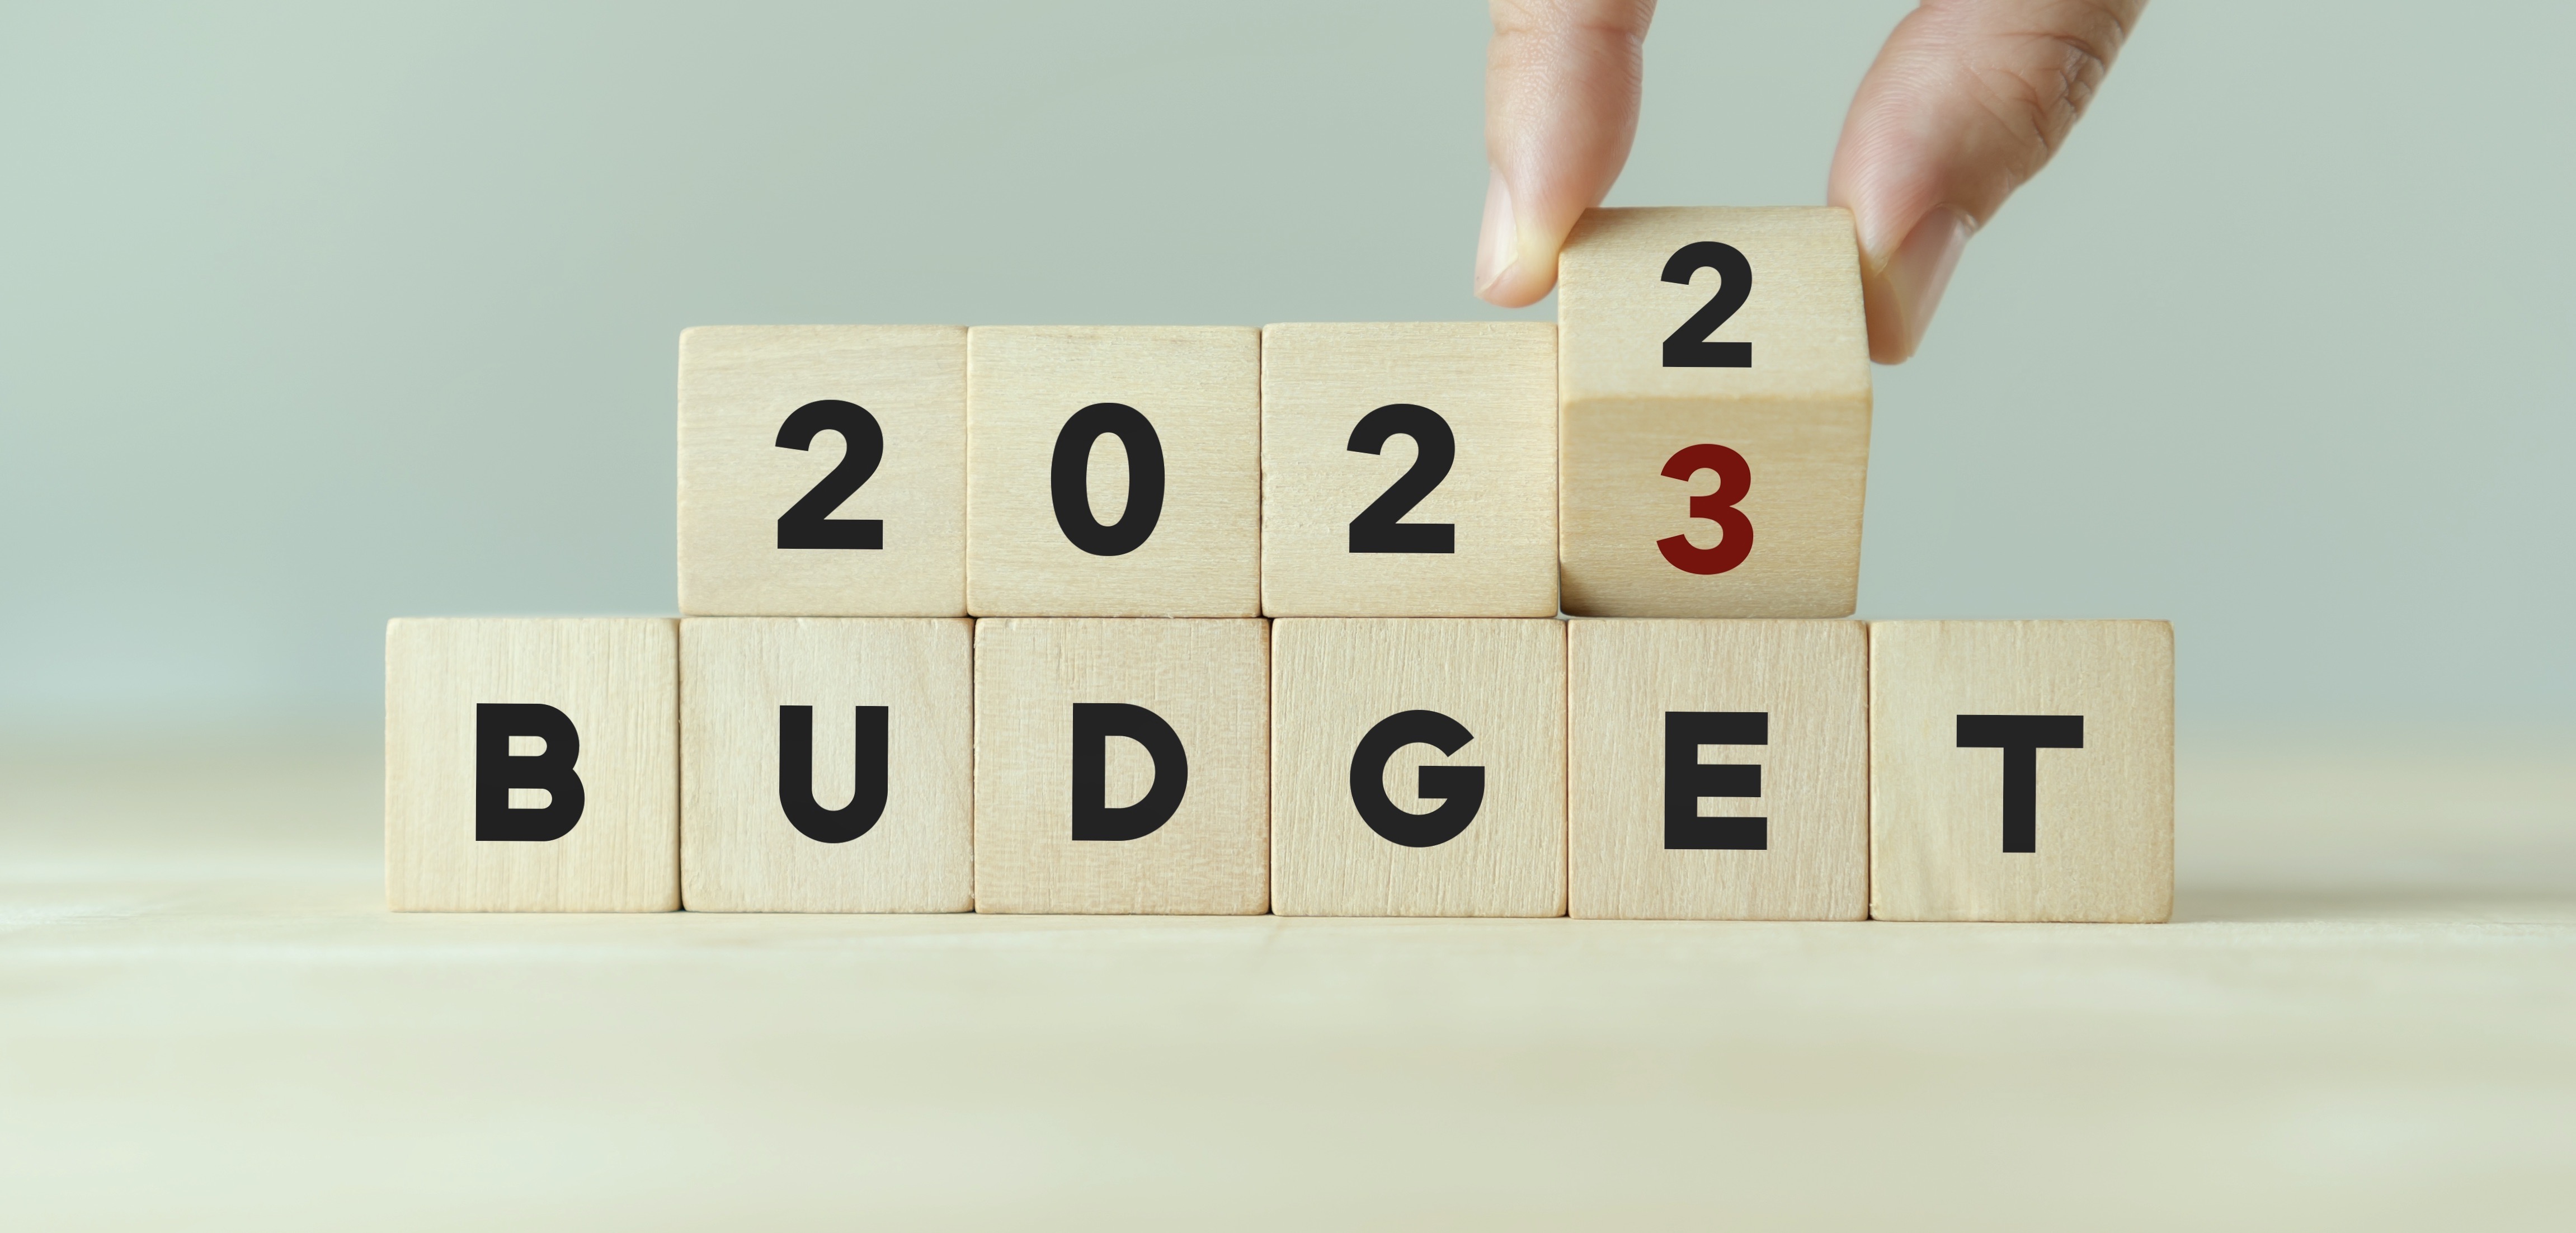 2023 Budget planning and allocation concept. Hand flips wooden cube and changes the inscription "BUDGET 2022" to "BUDGET 2023" with grey background, copy space.